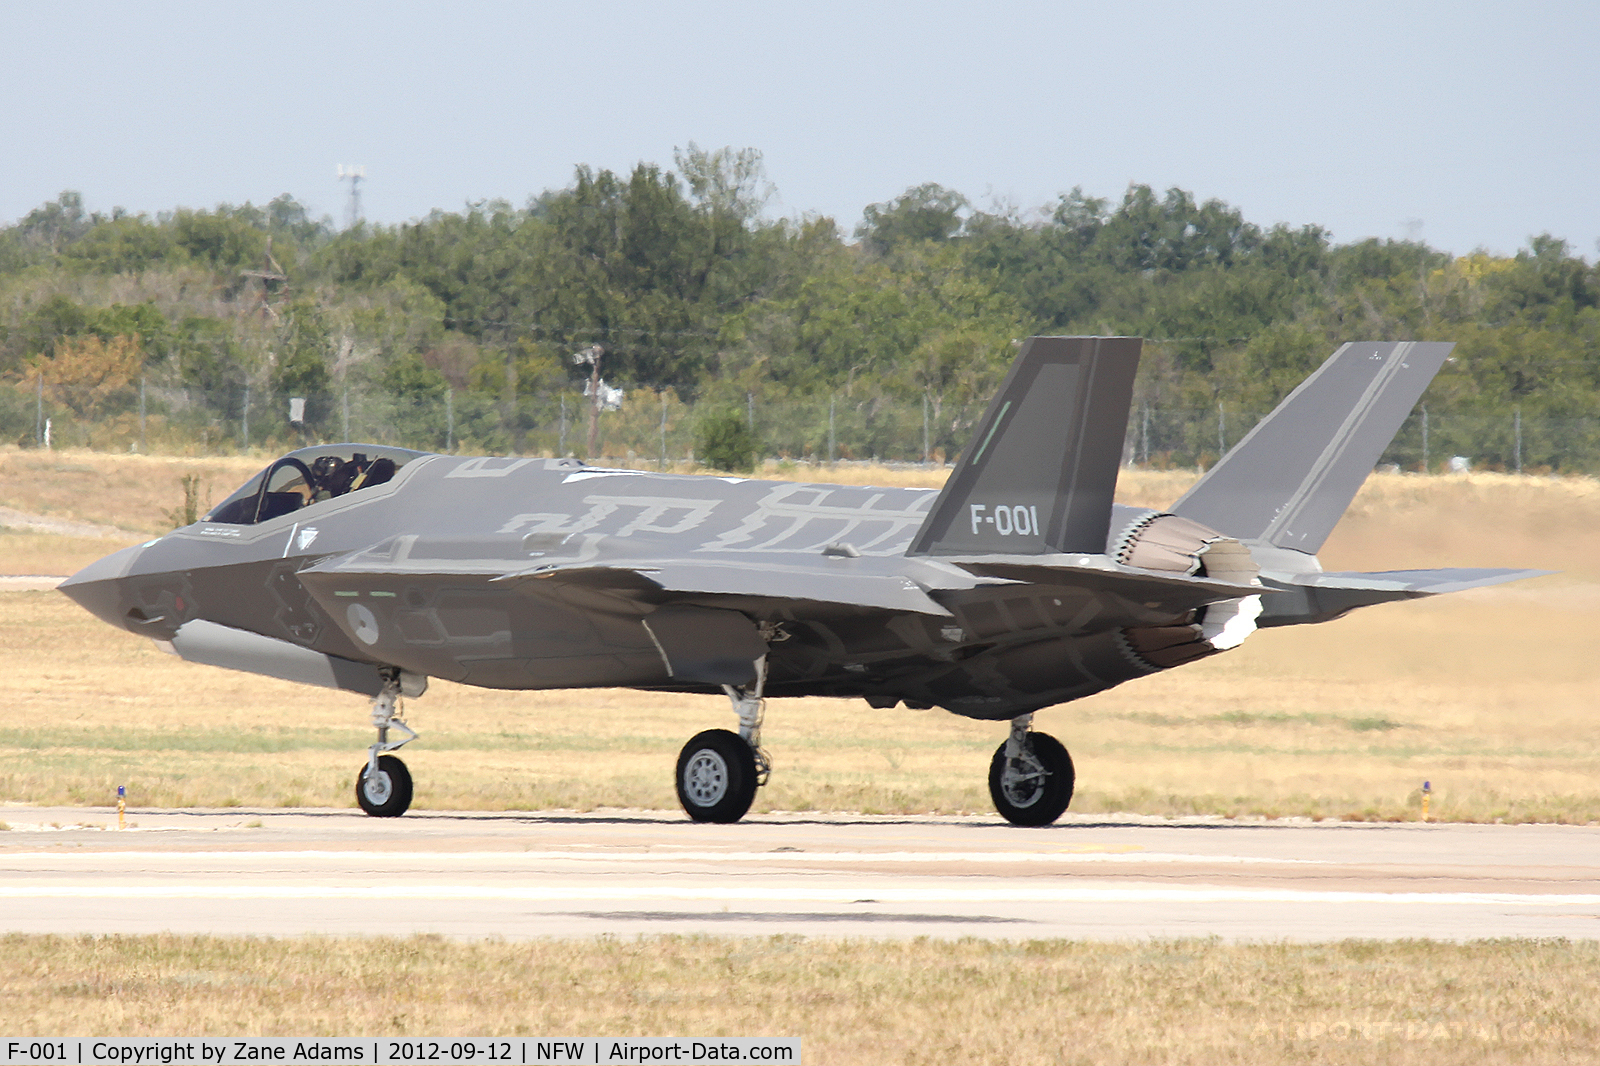 F-001, 2012 Lockheed Martin F-35A Lightning II C/N AN-1, The First F-35 for the Royal Netherlands Air Force taxis out for takeoff at NAS Fort Worth